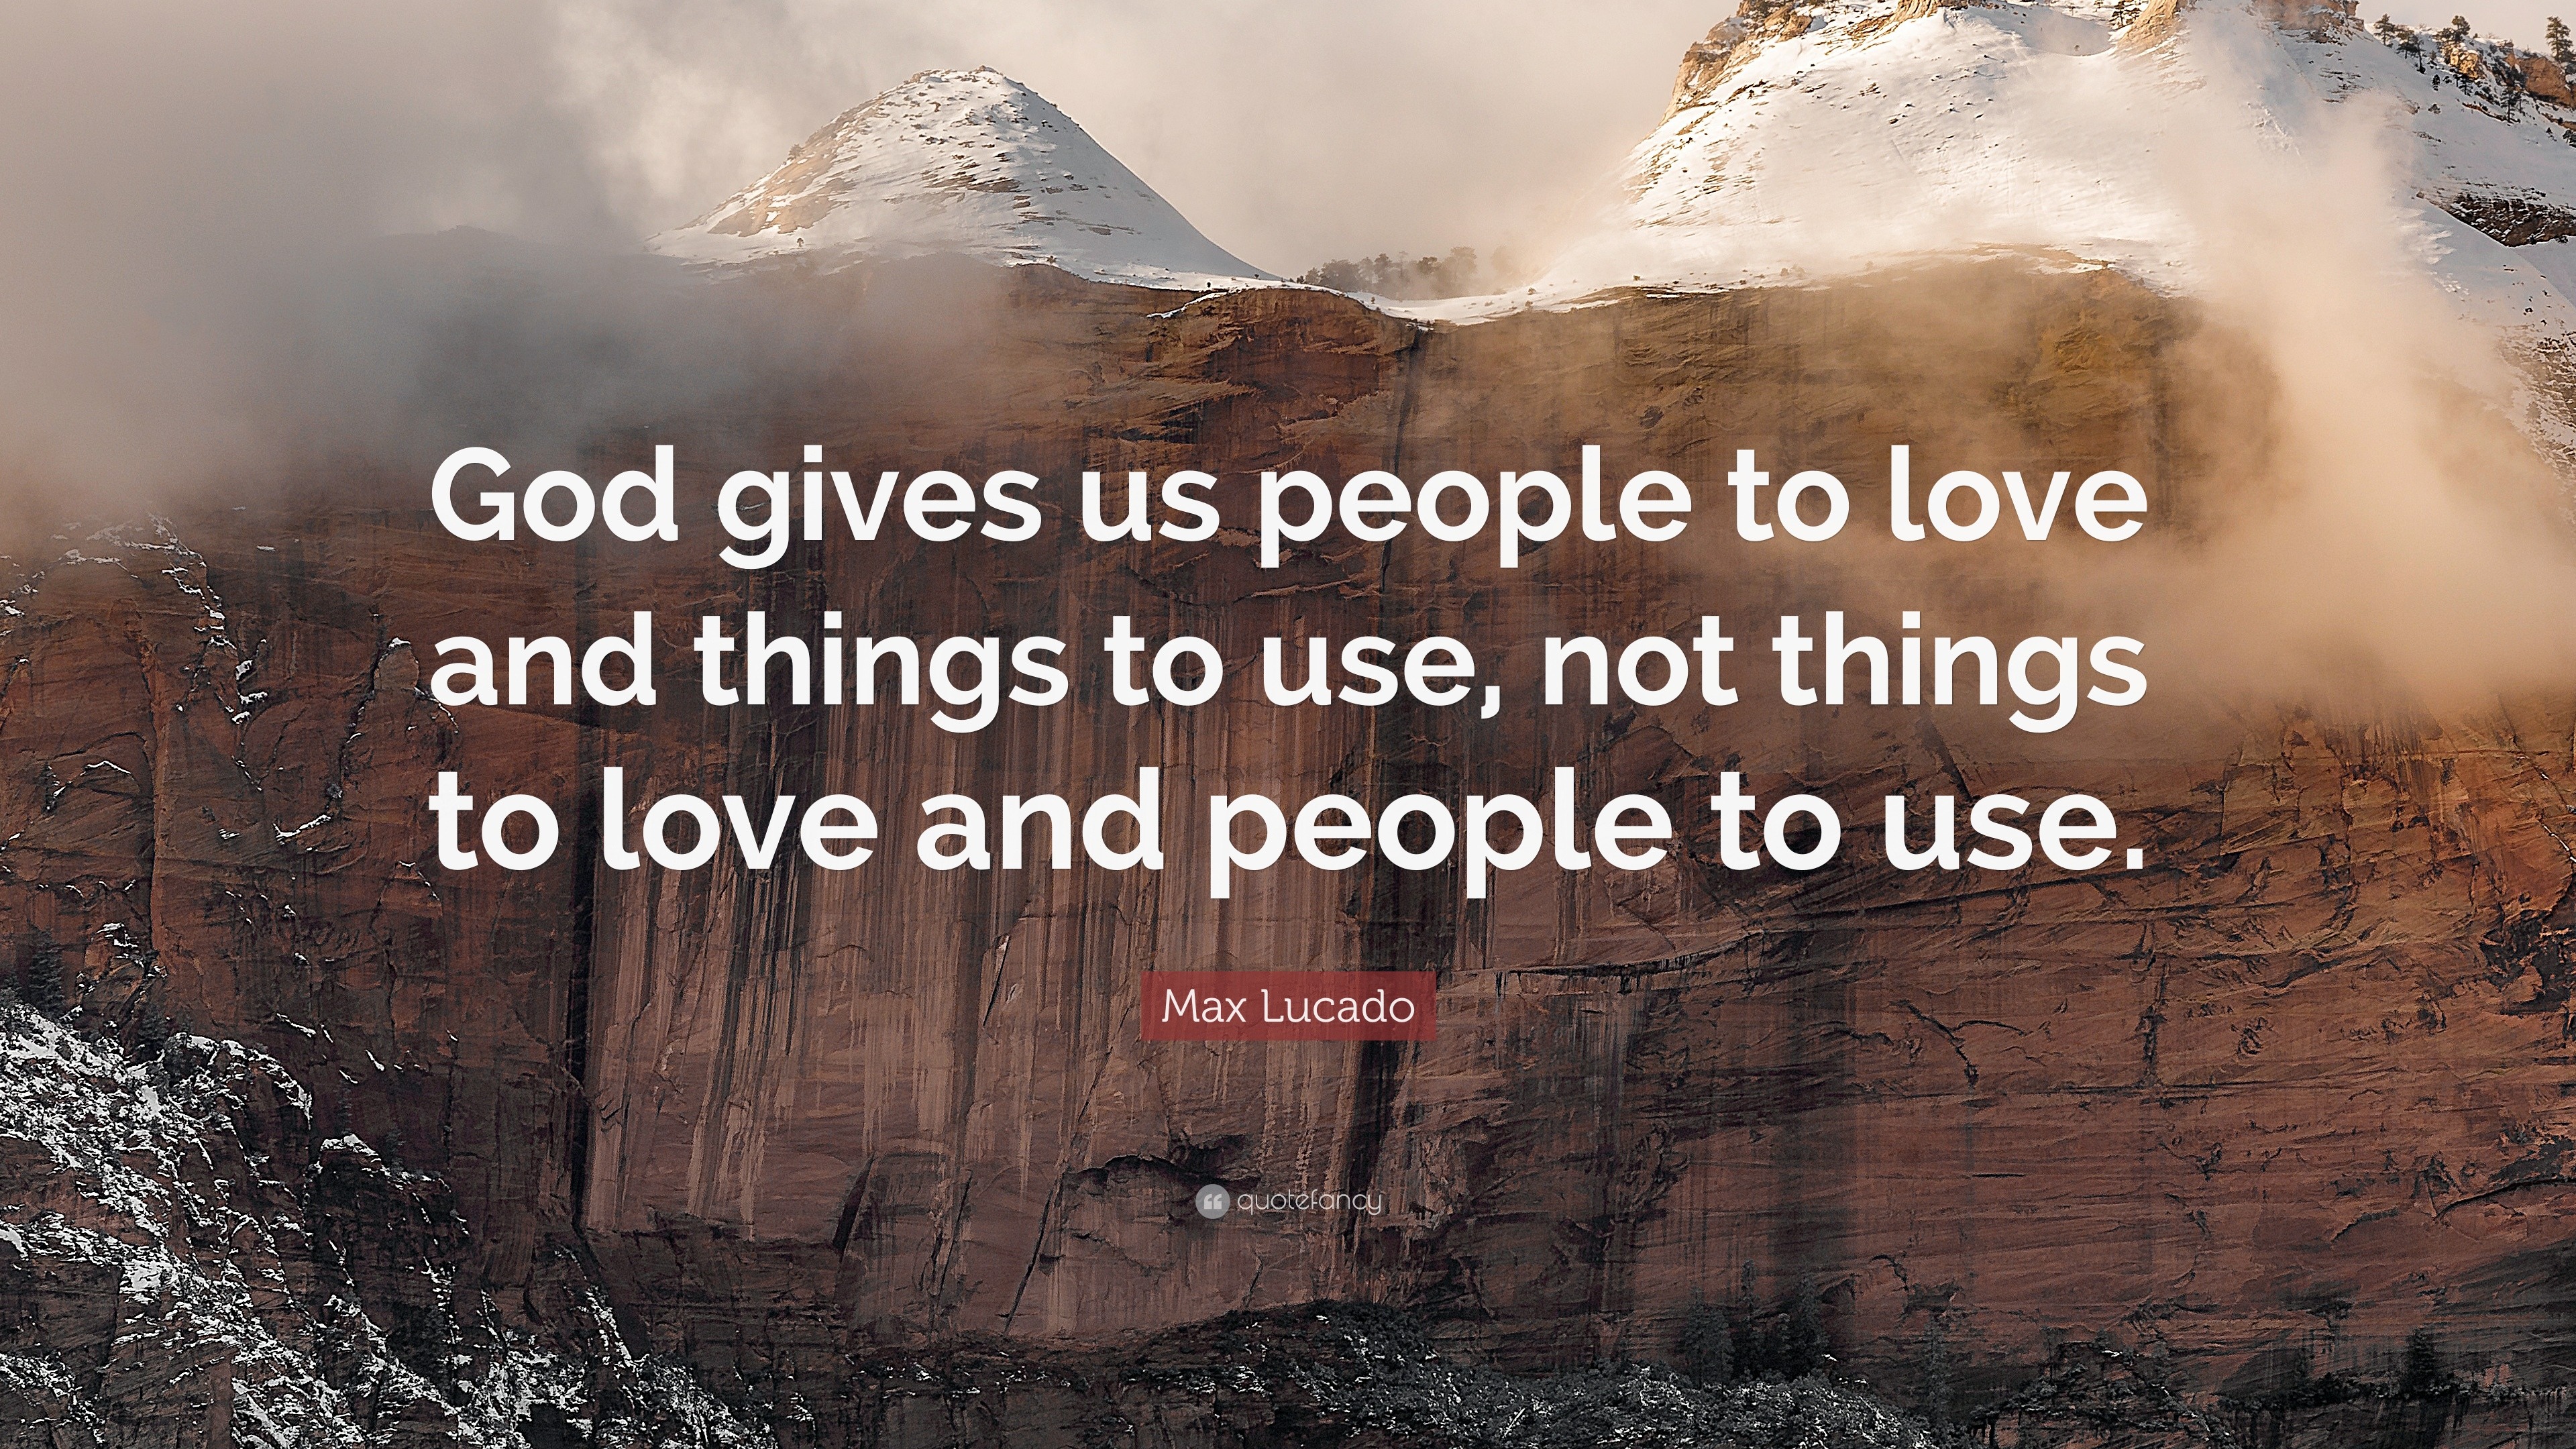 Max Lucado Quote “God gives us people to love and things to use